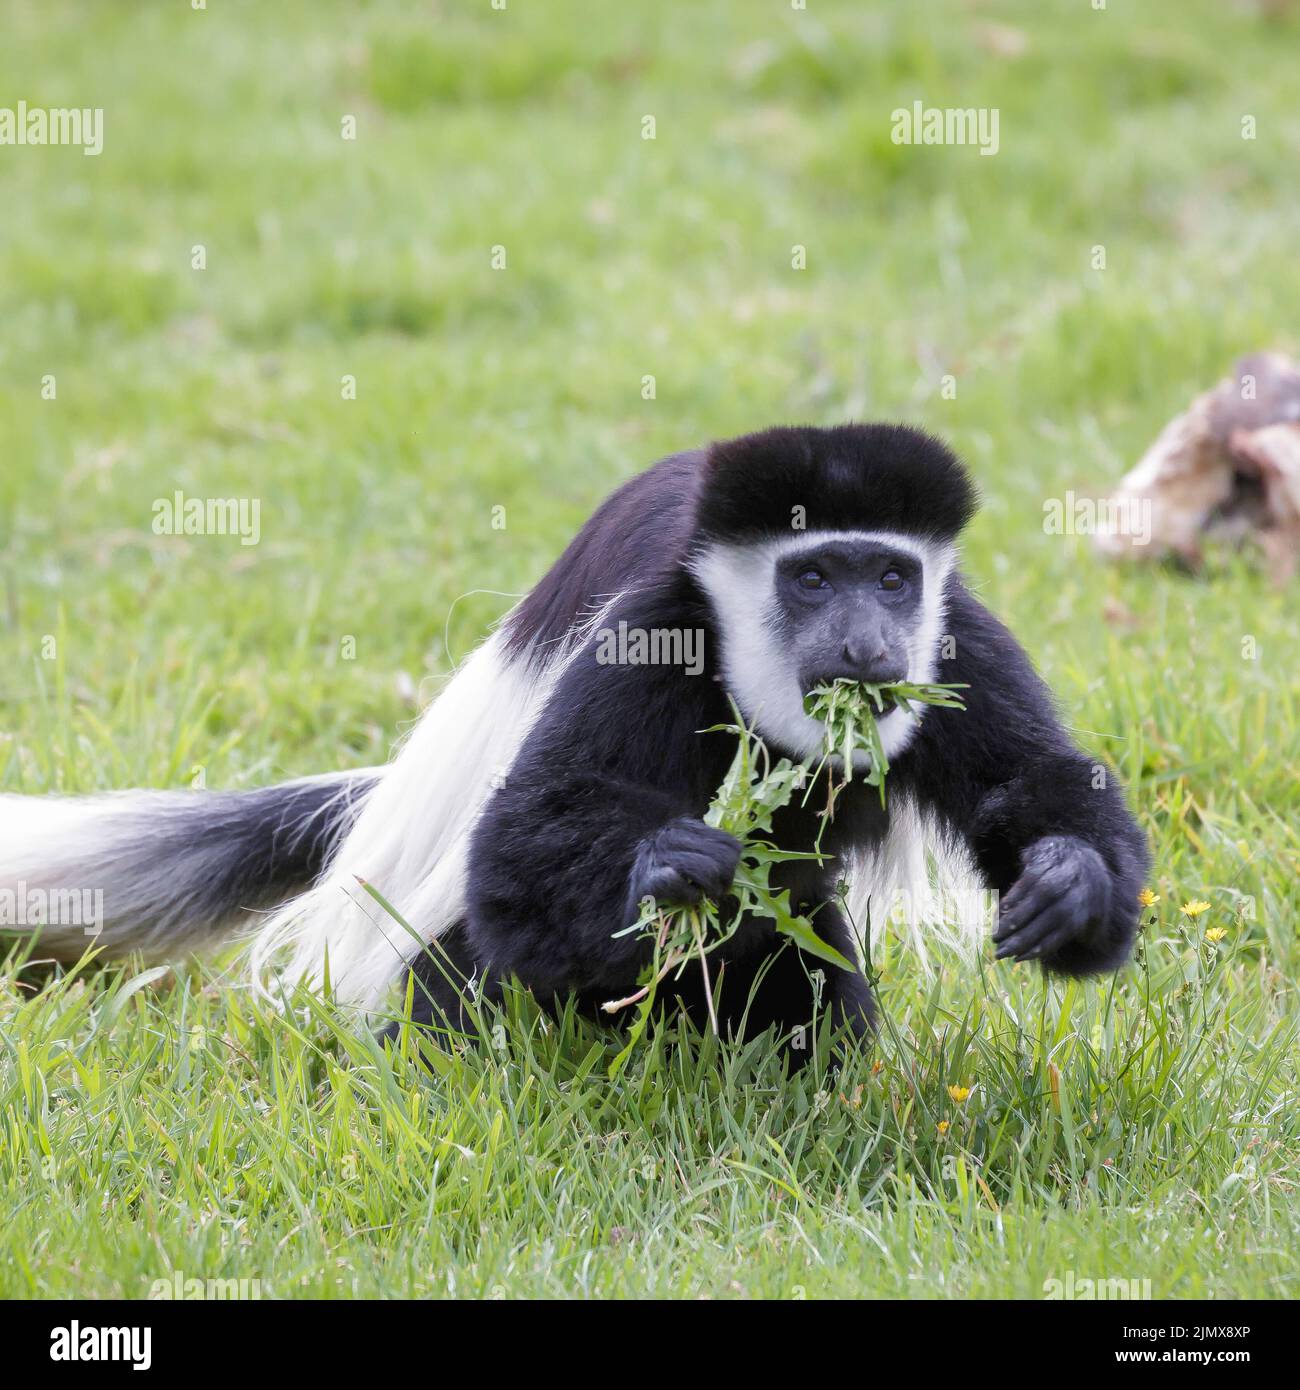 Black and White Colobus eating some weeds Stock Photo